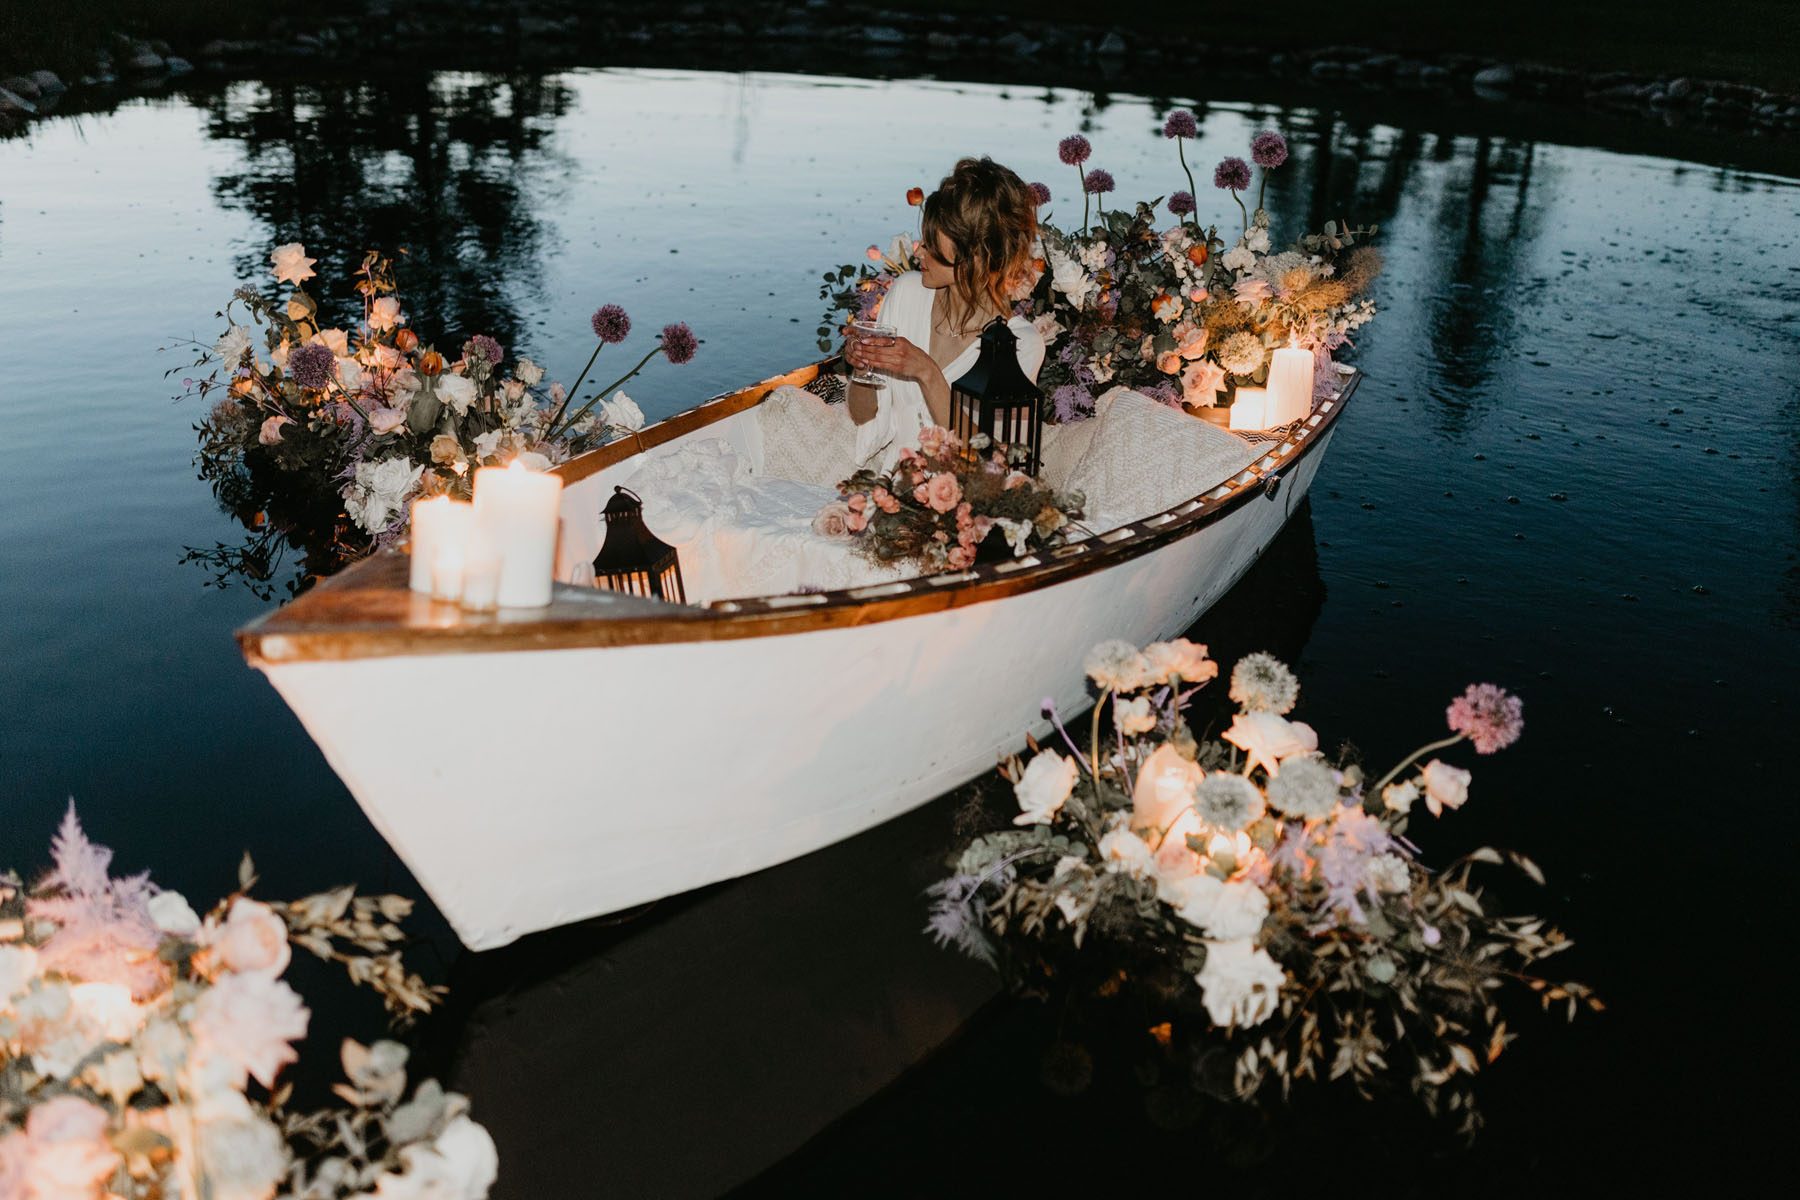 Moody floral photoshoot of woman in a canoe surrounded by candles and romantic floral arrangements